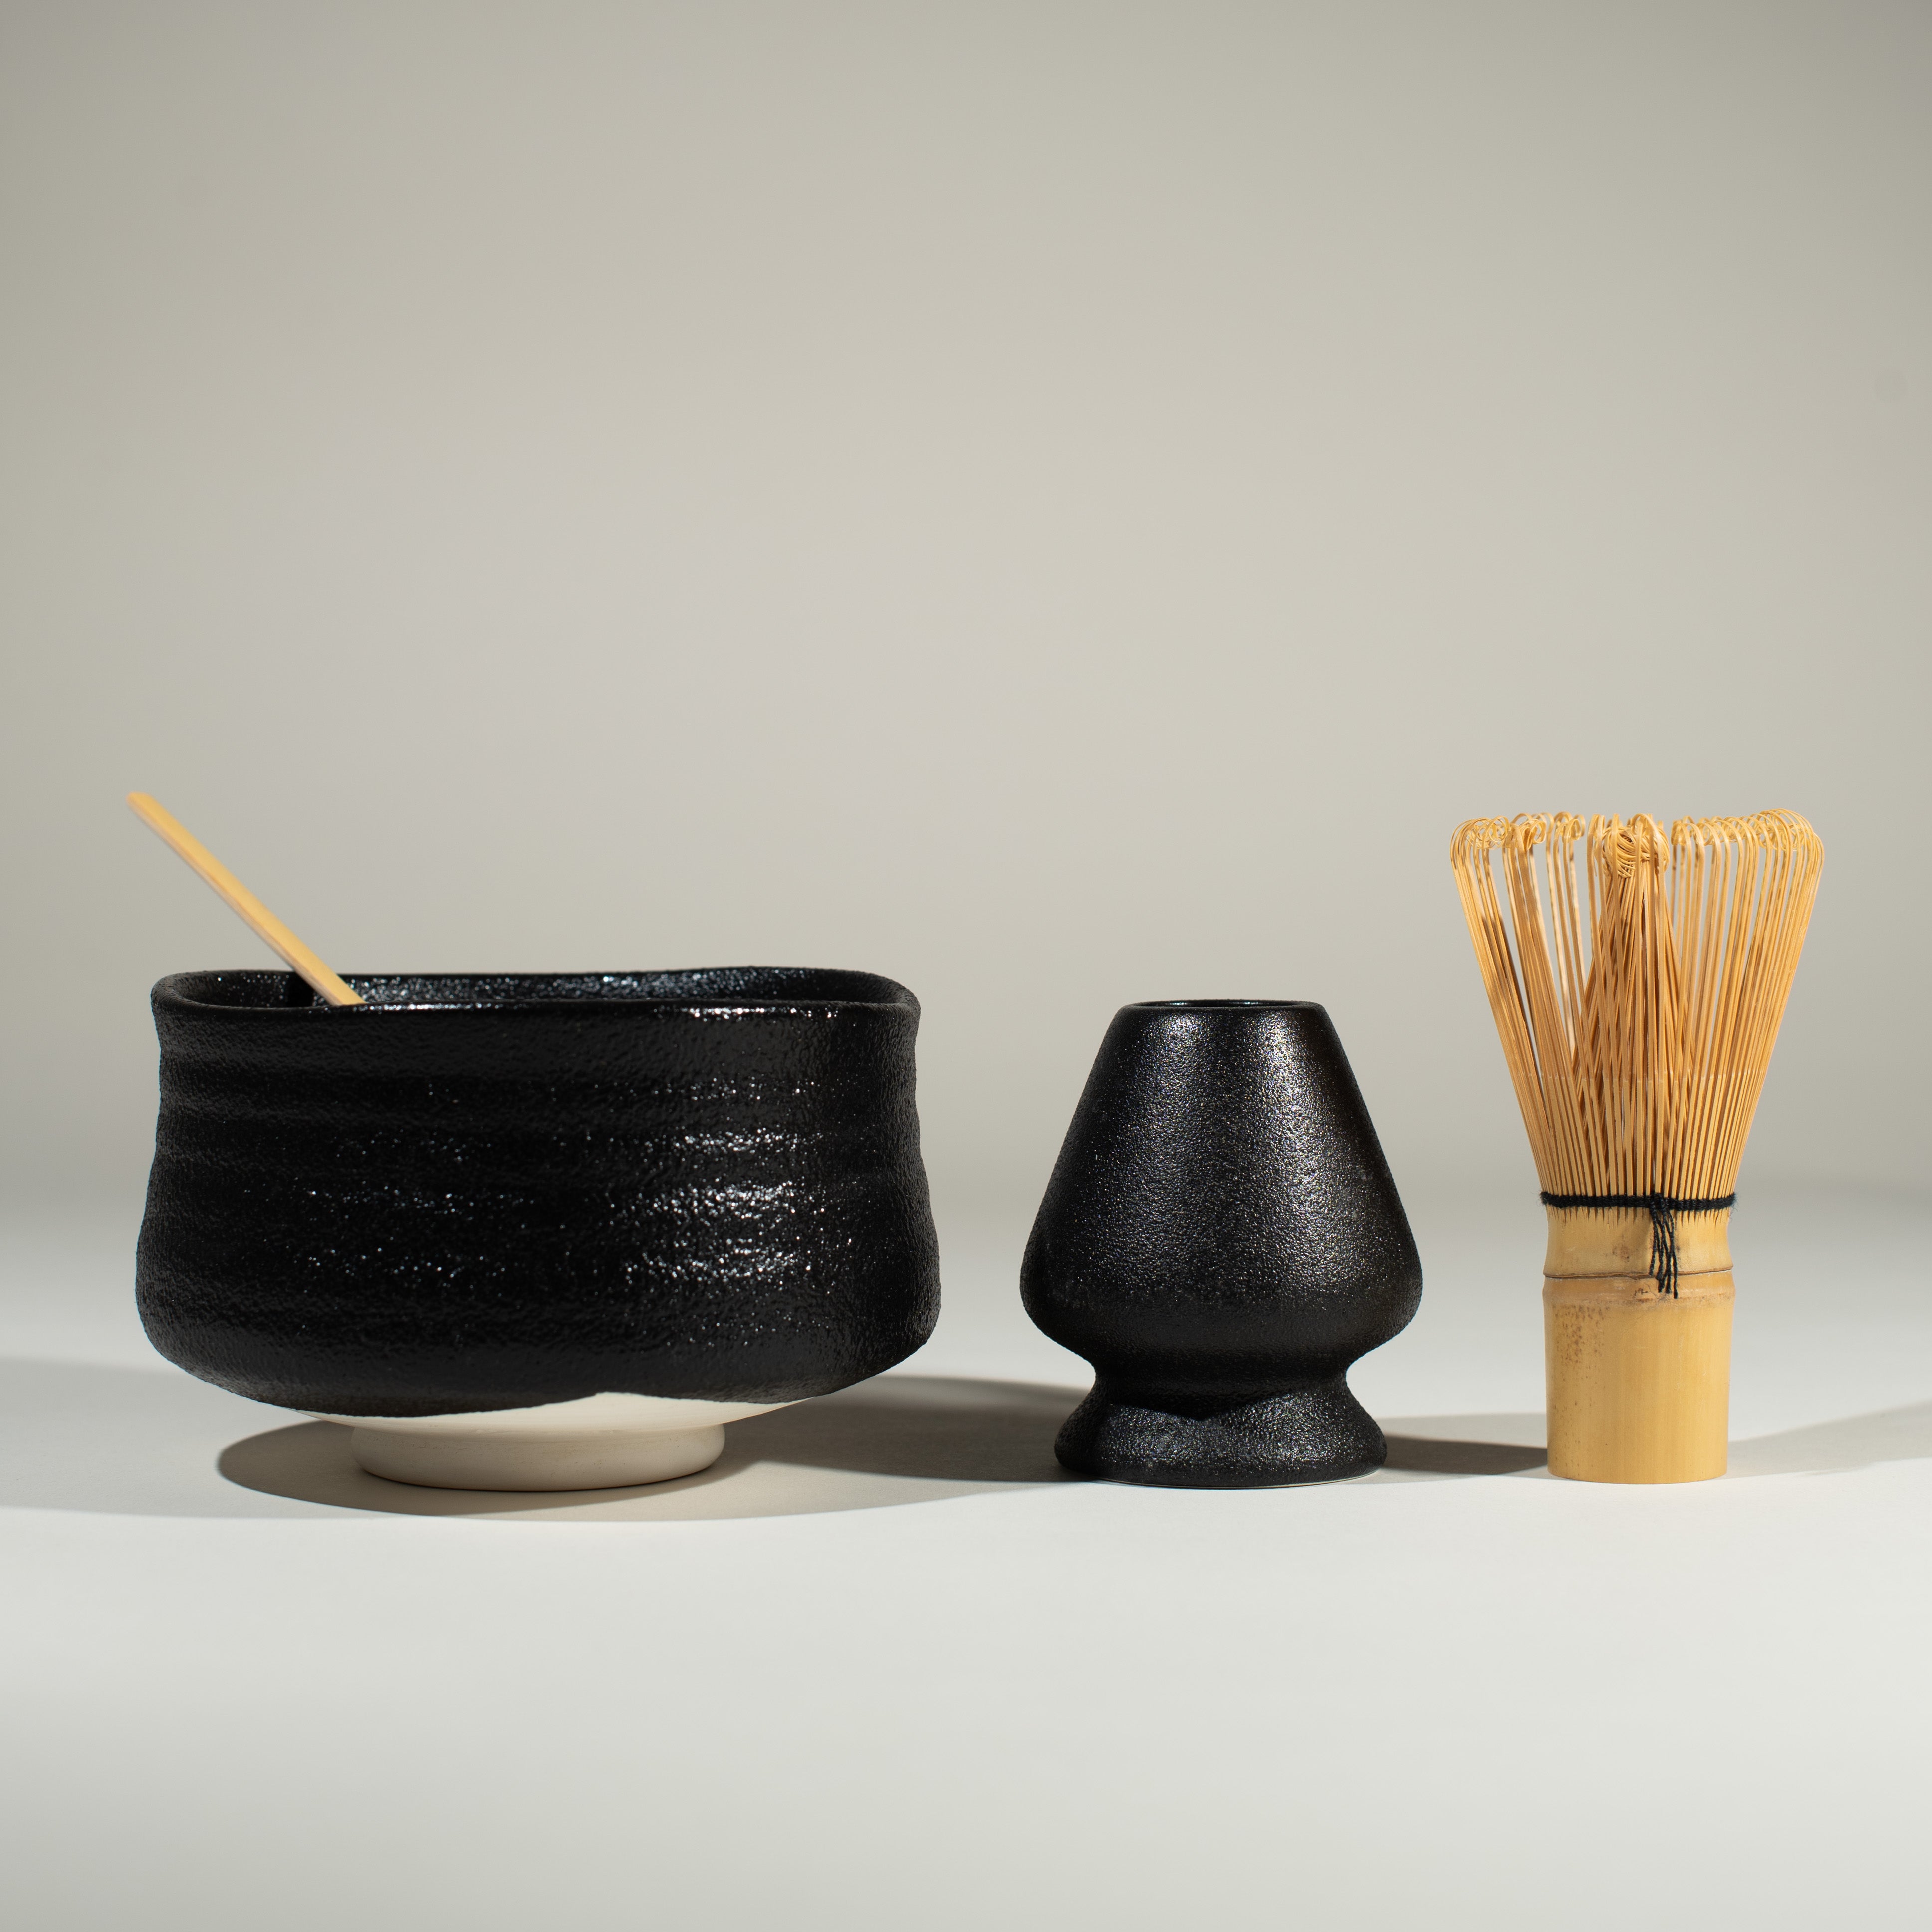 Japanese matcha, green tea bowl preparation set in contemporary design. Professional use and home use.